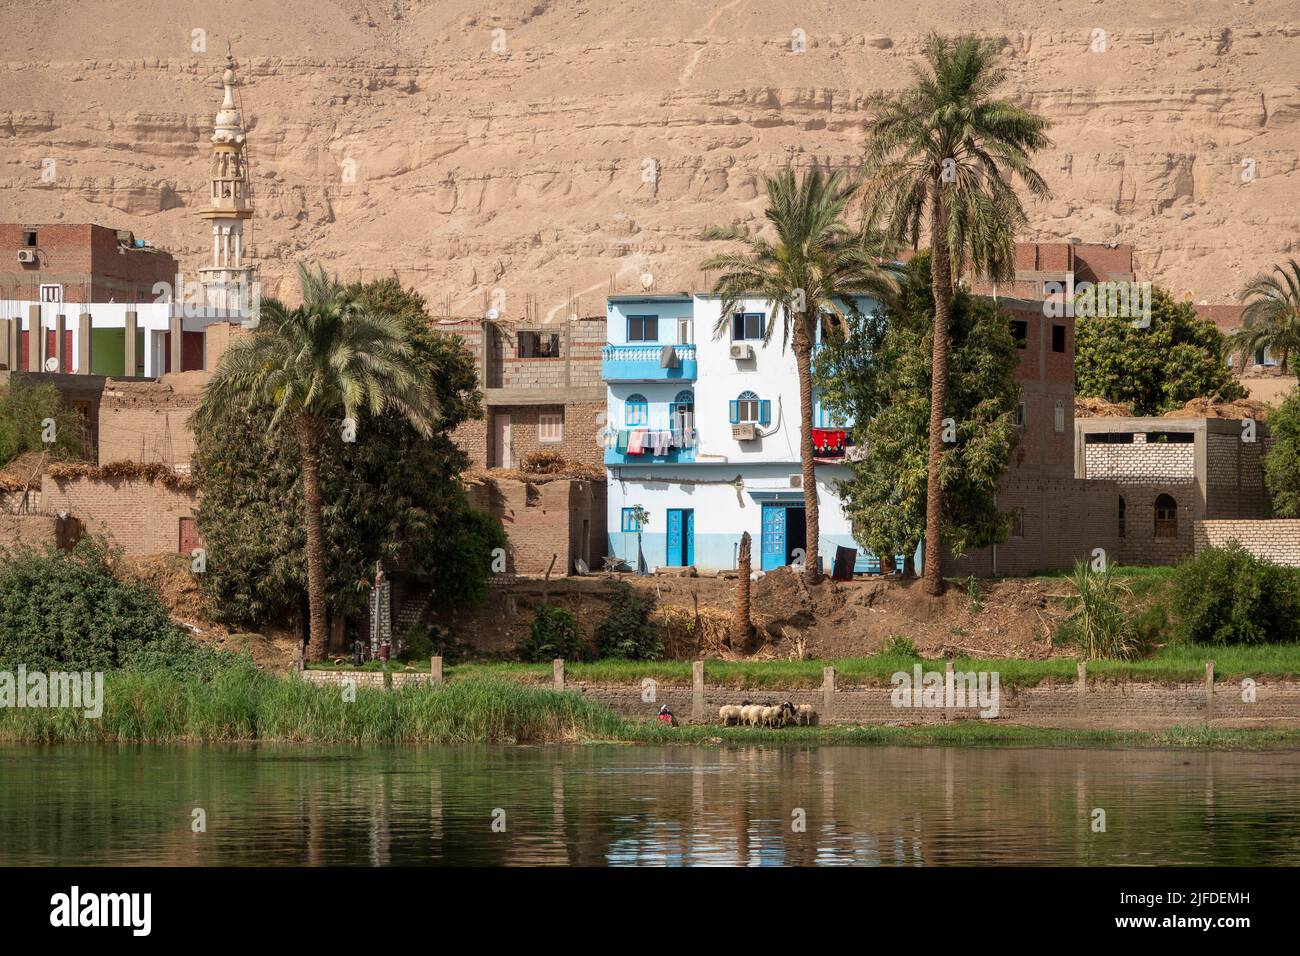 Domestic property on the banks of the river Nile, Egypt Stock Photo